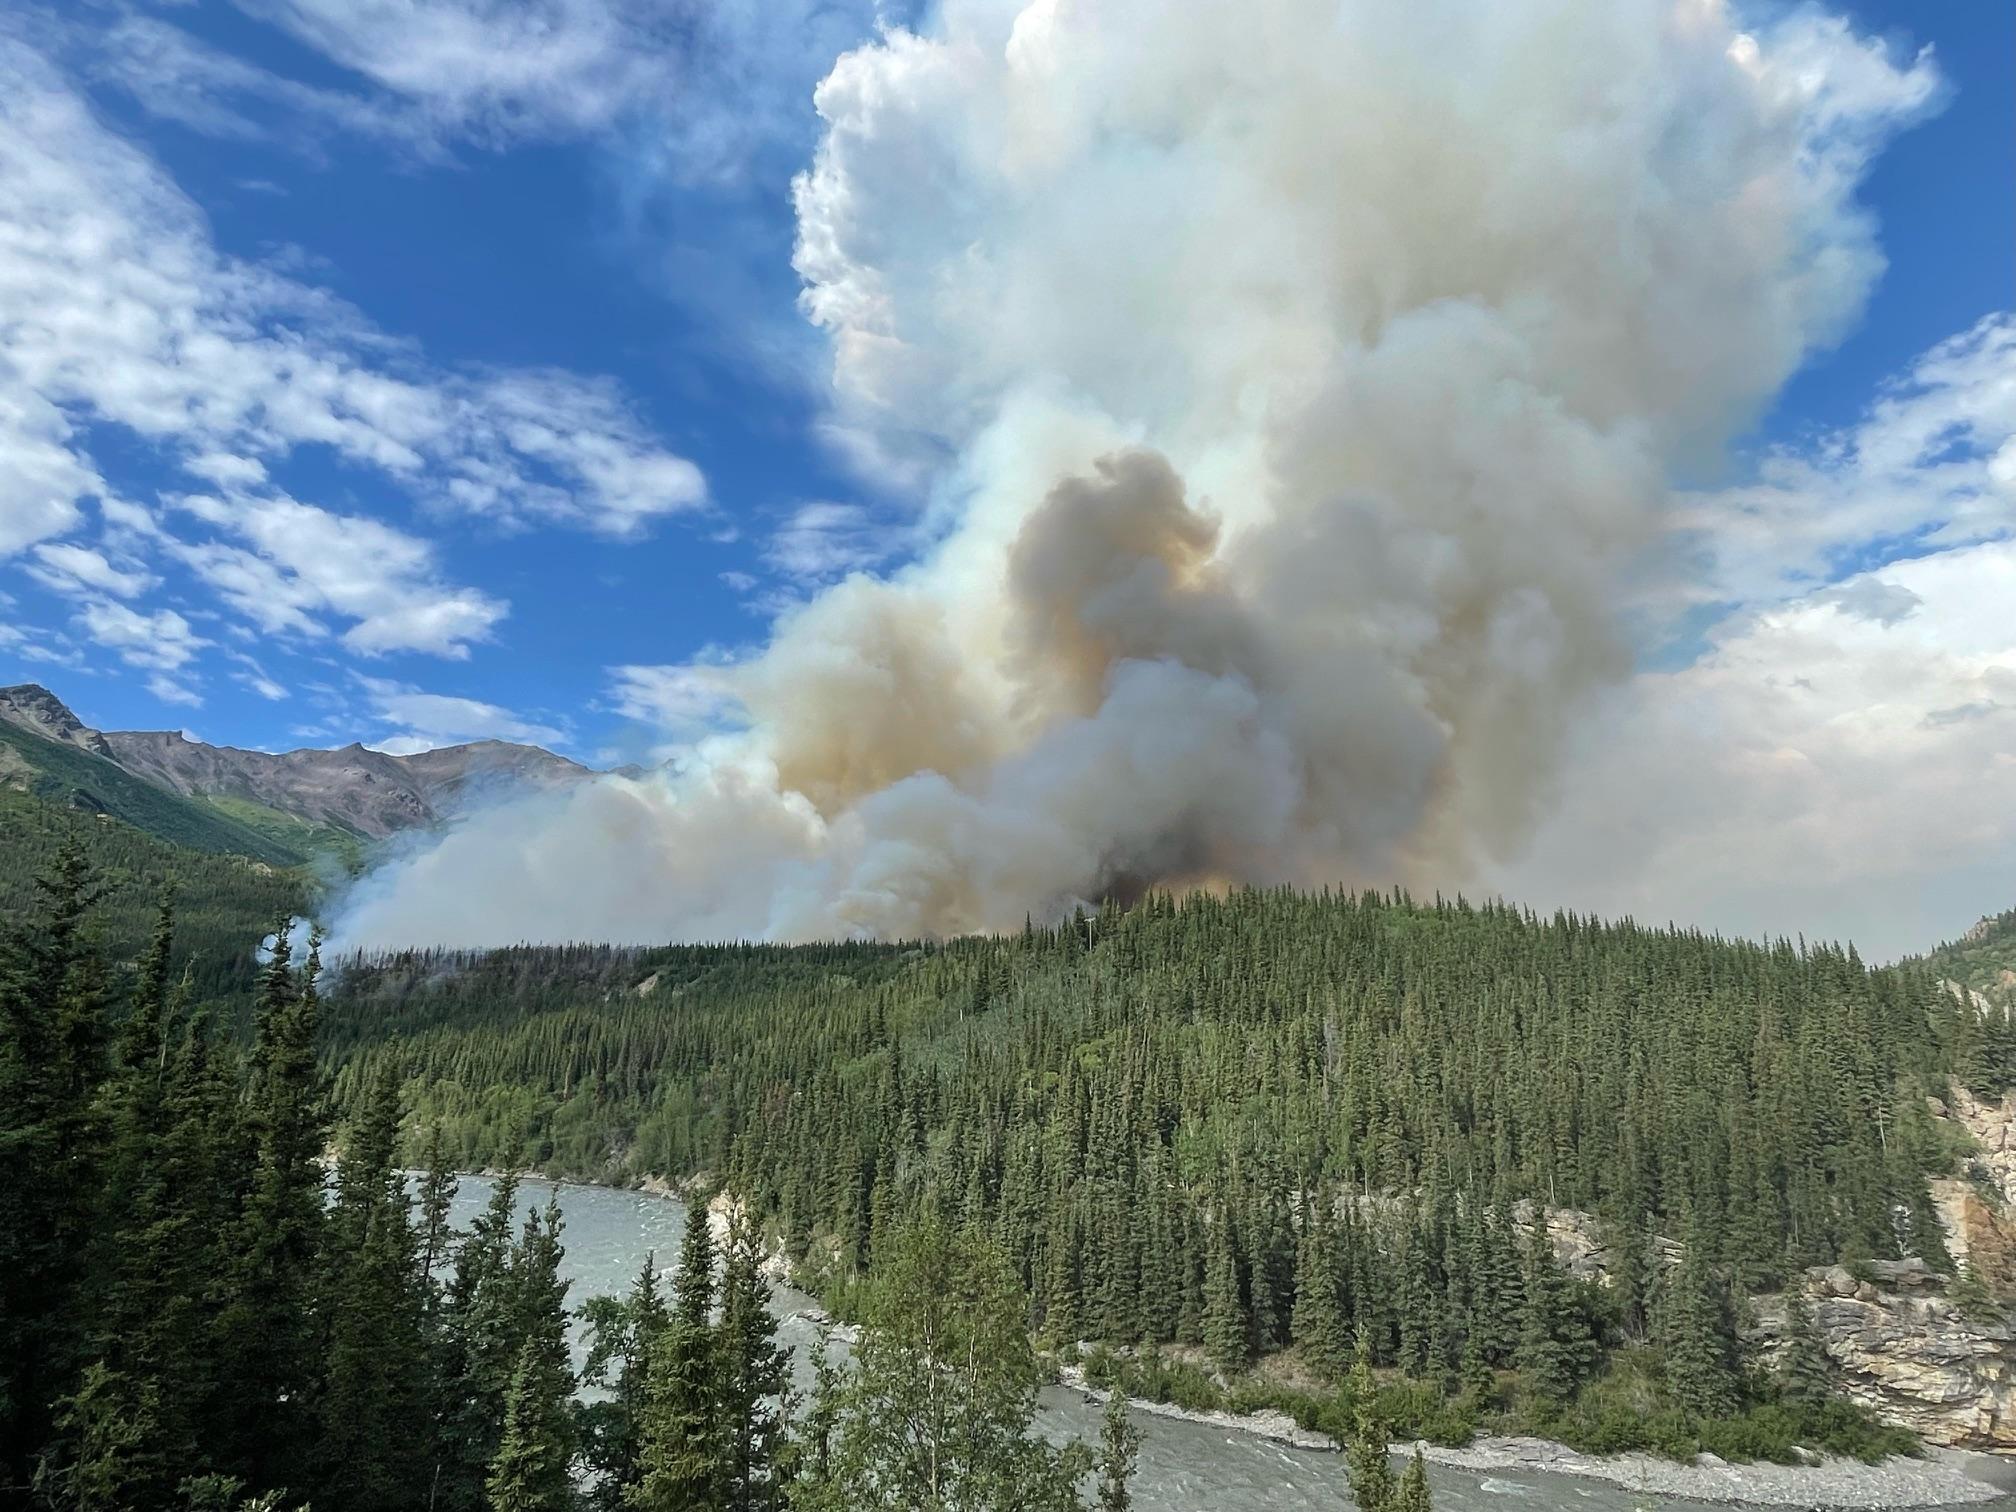 A large smoke plume rises from a river canyon.